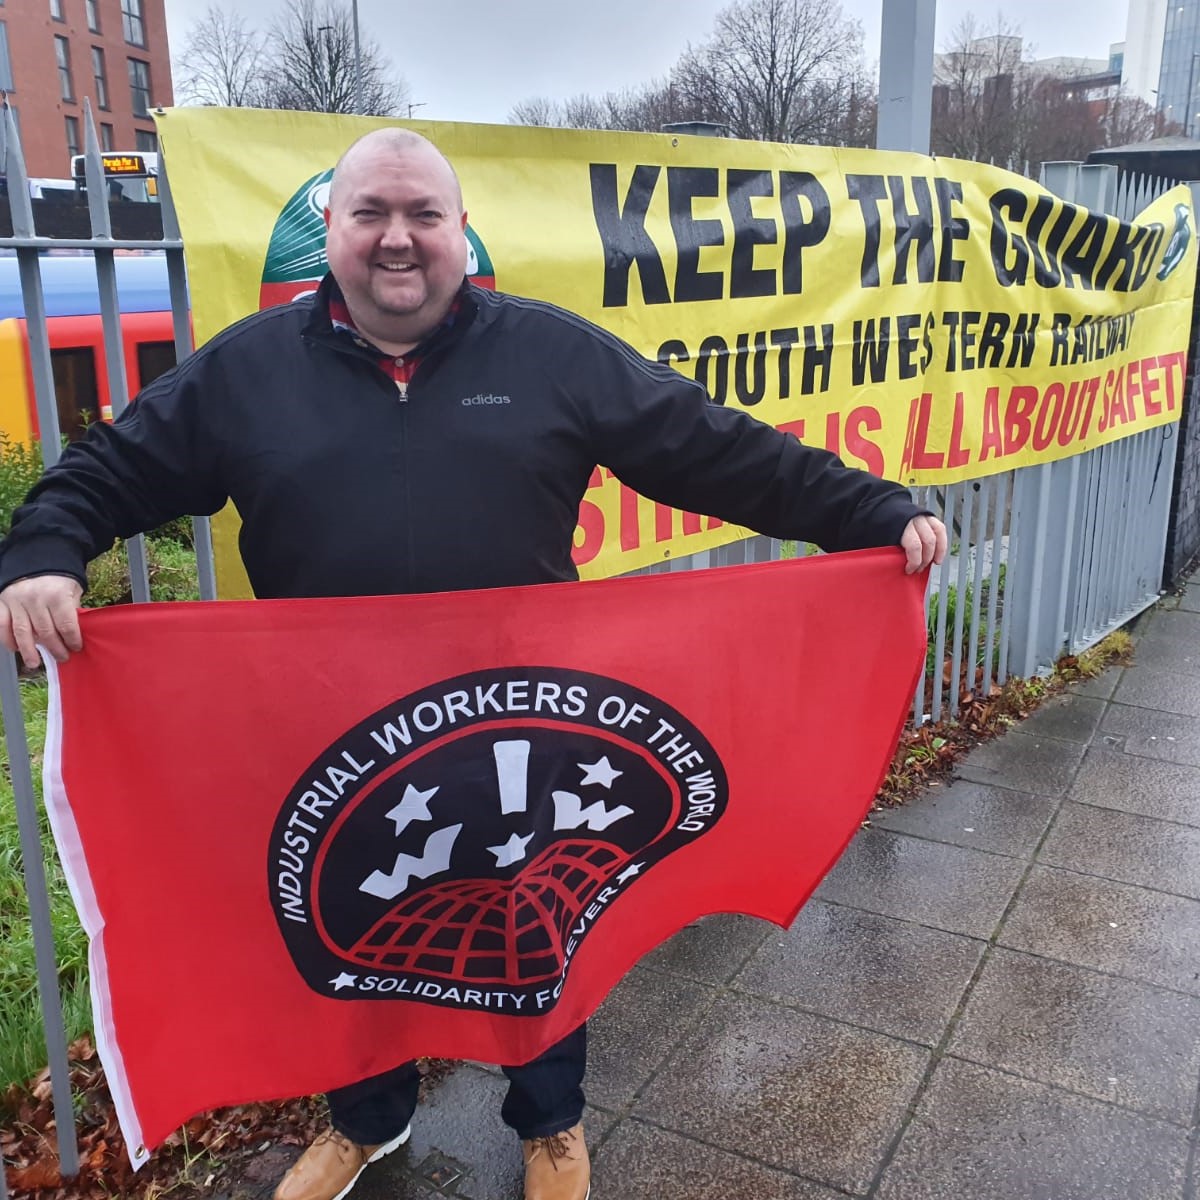 Opinion: Industrial Workers of the World uniting in Southampton